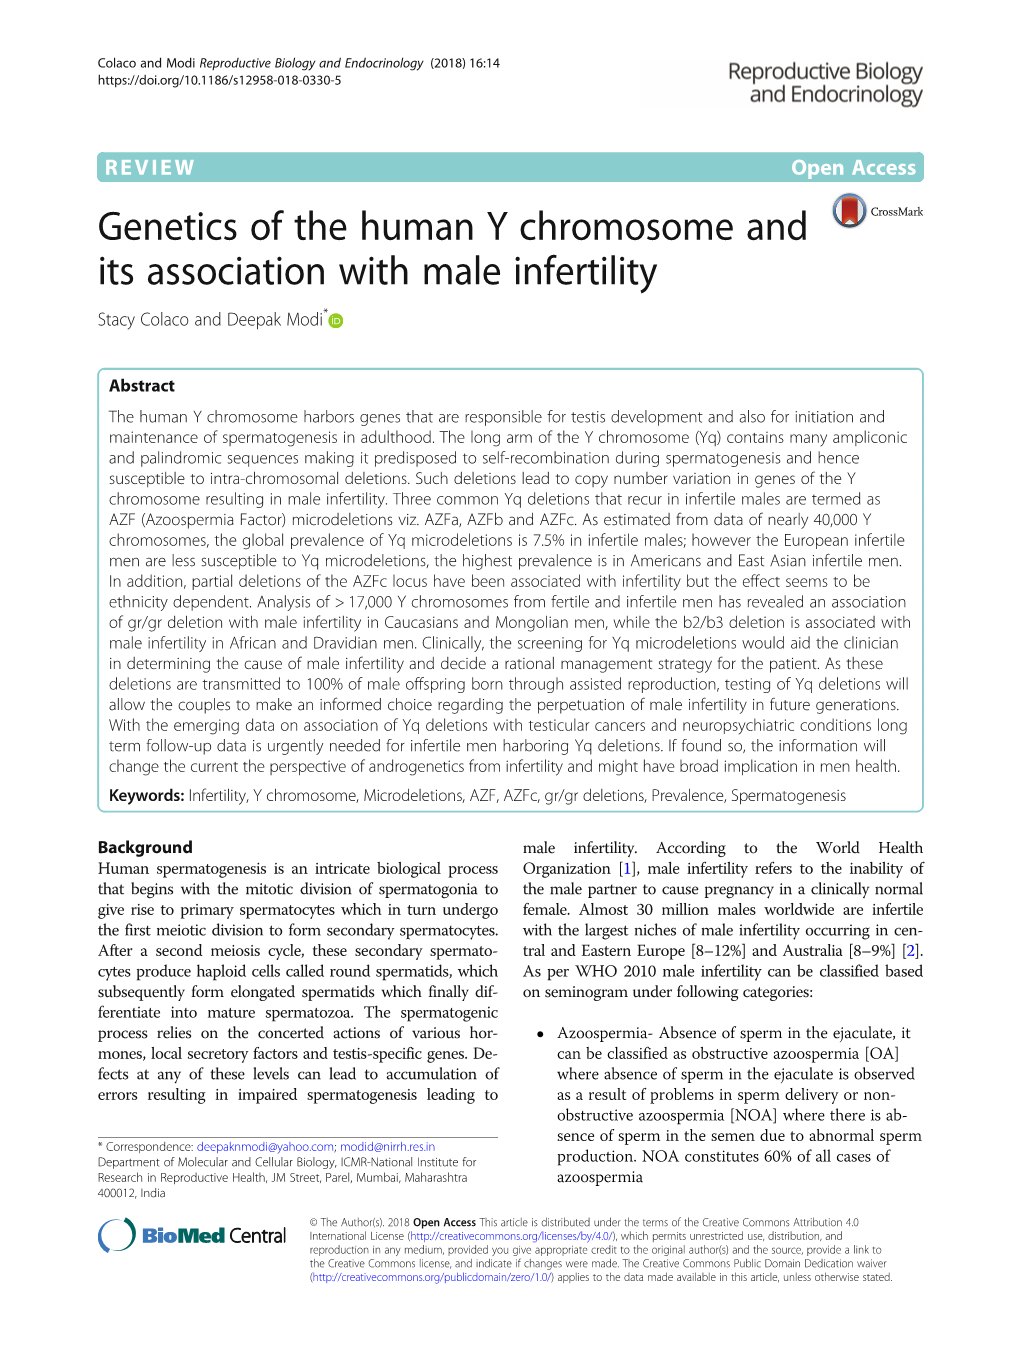 Genetics of the Human Y Chromosome and Its Association with Male Infertility Stacy Colaco and Deepak Modi*